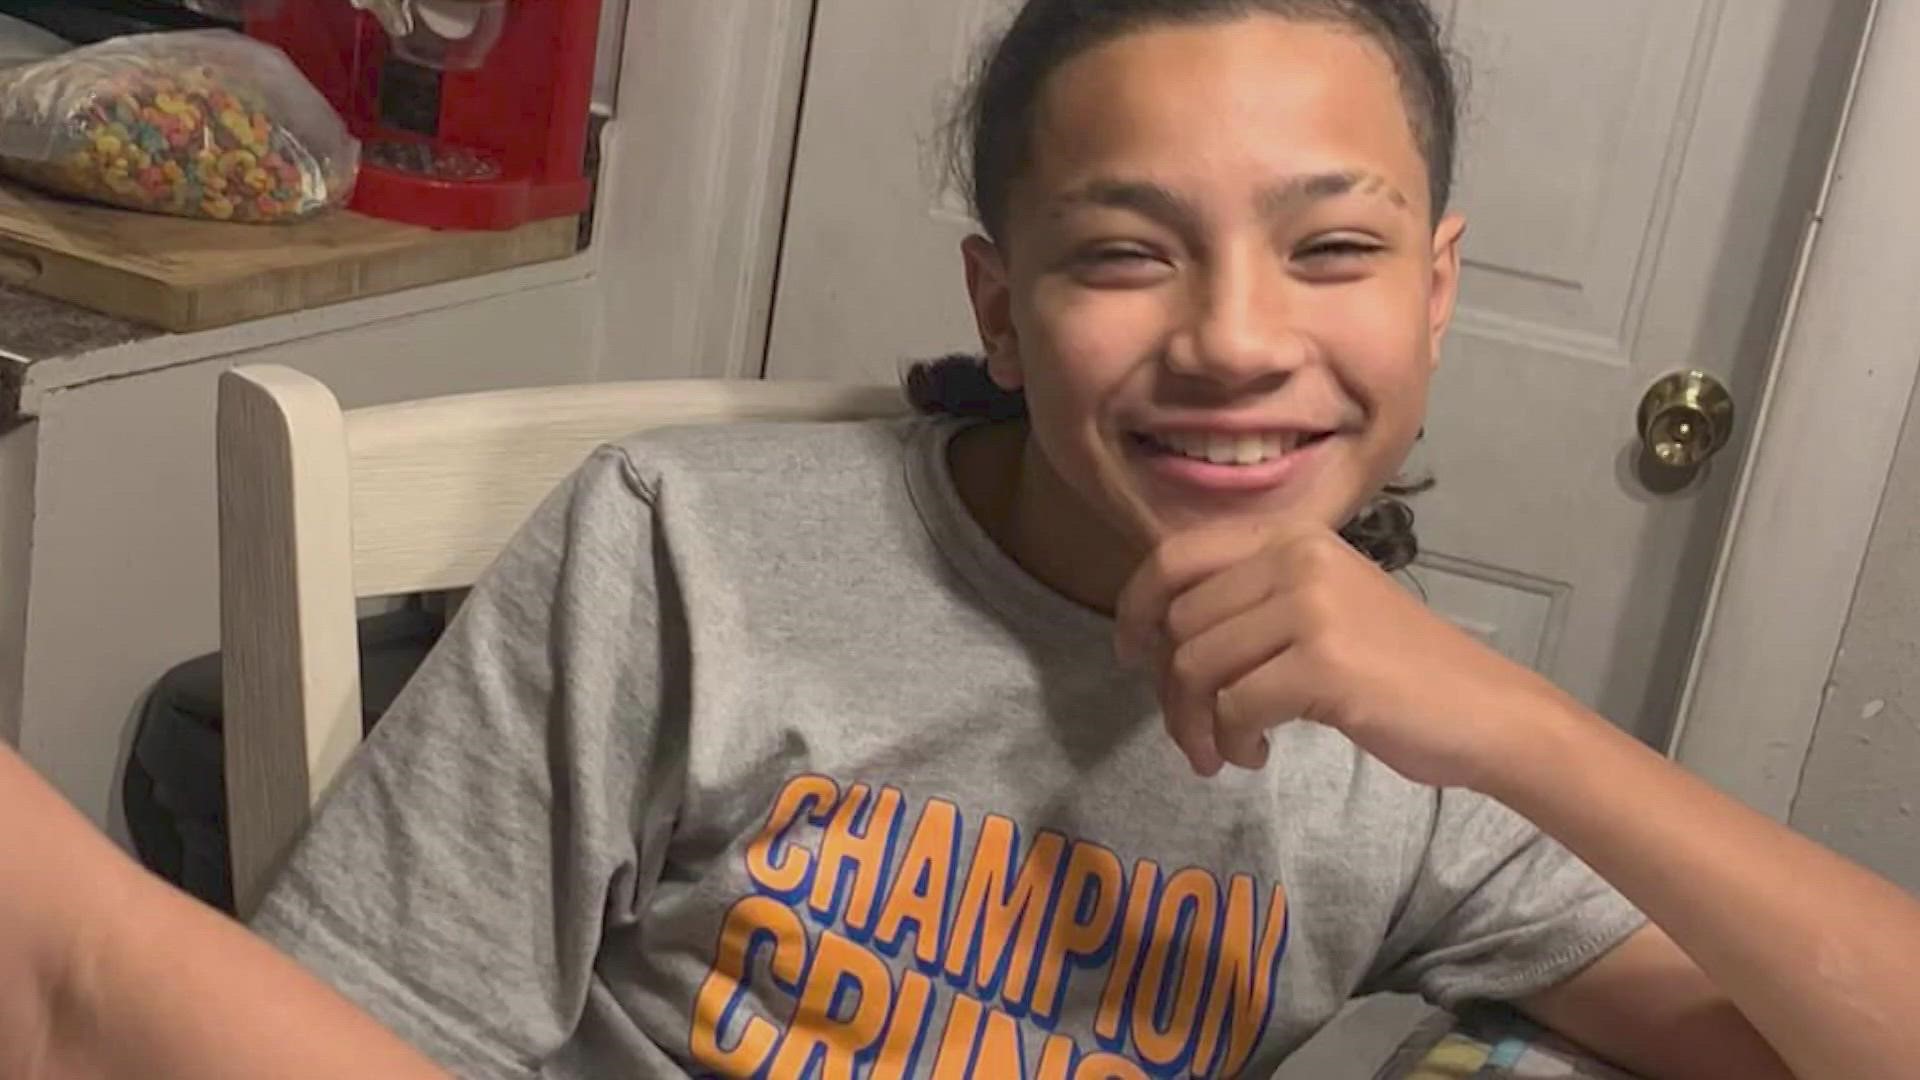 The grand jury decided not to move forward with the criminal indictment against Stephen Ramos who shot and killed a 13-year-old in June 2022.